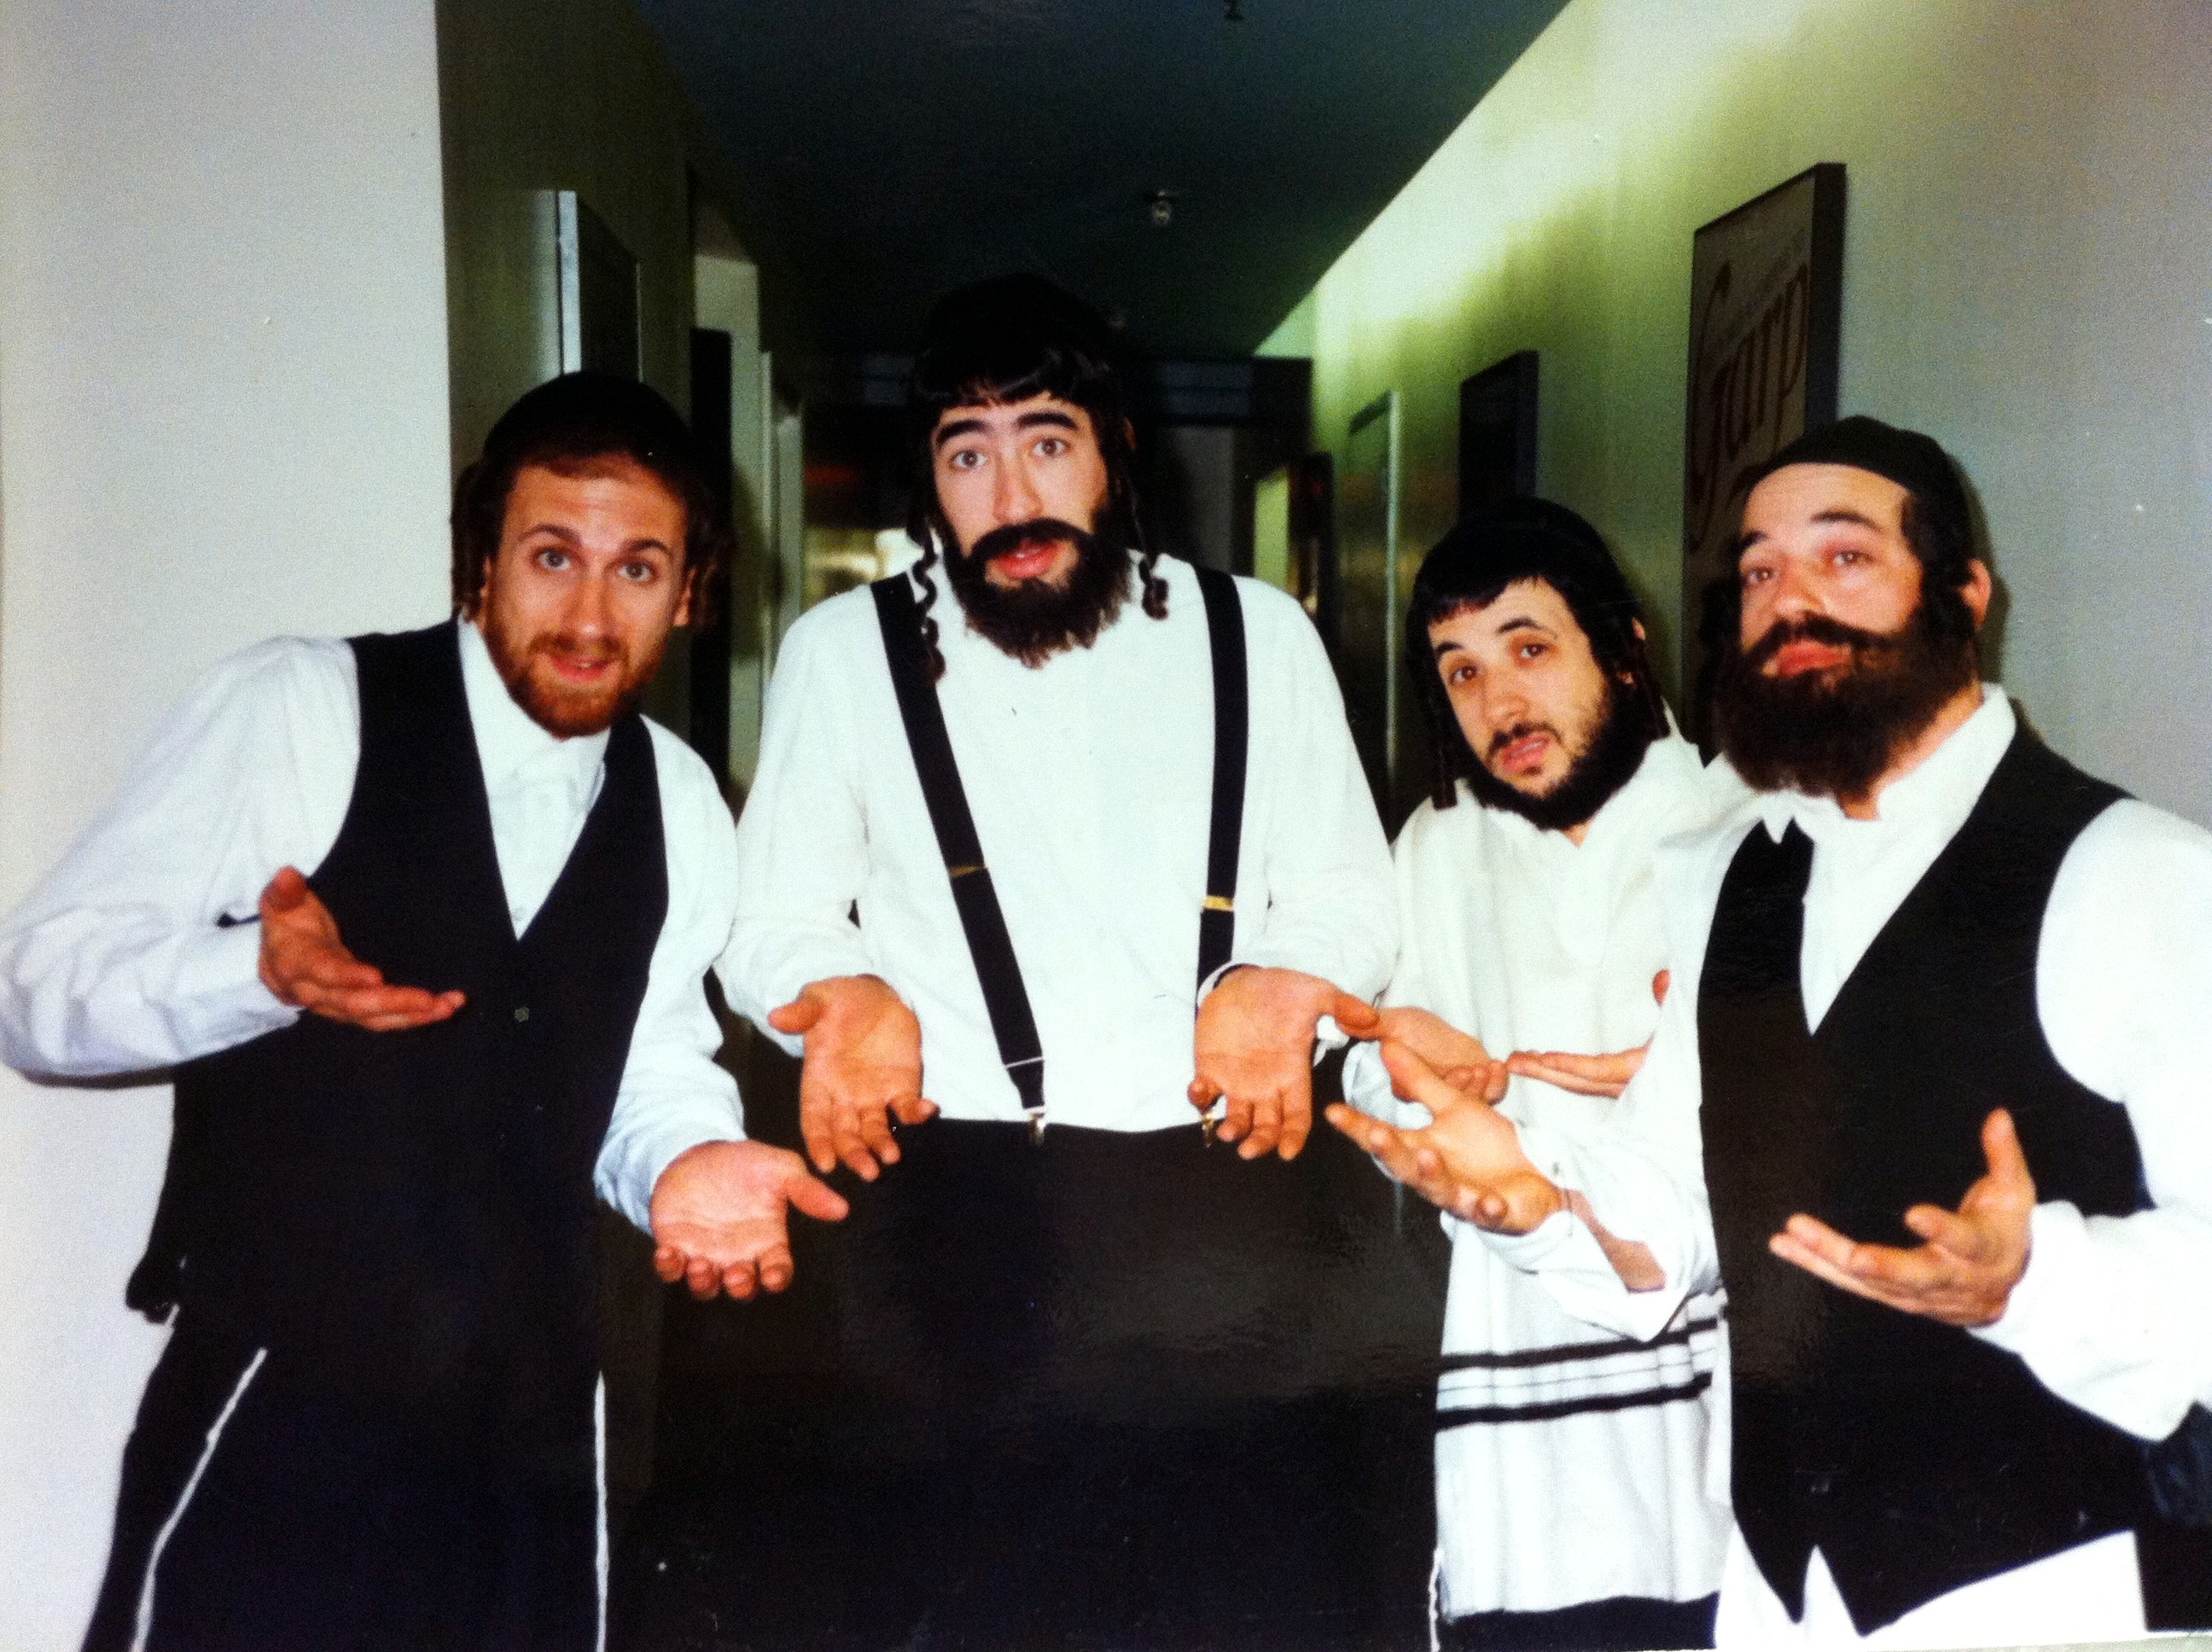 Hasidim Core - Looking for Melanie Griffith in 